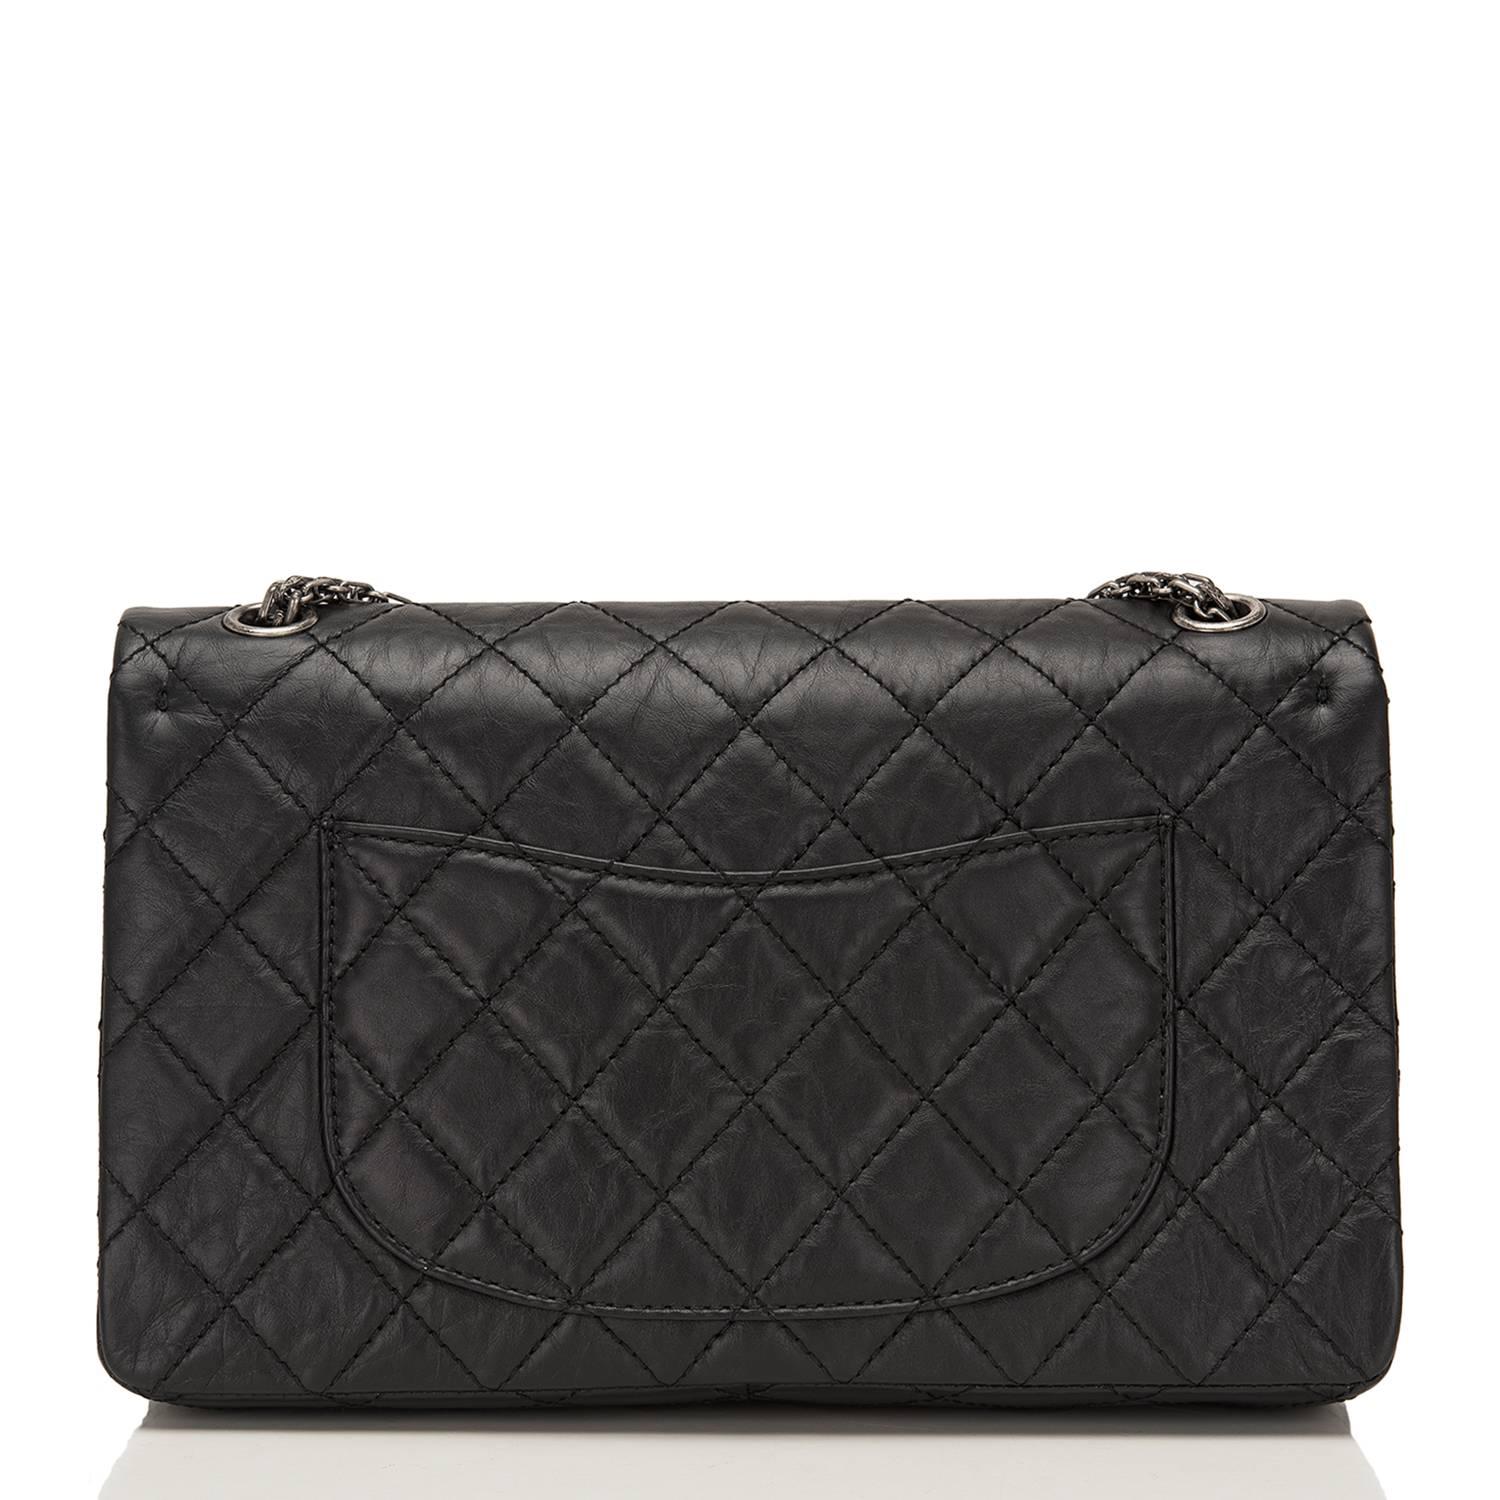 Women's Chanel Black Quilted Aged Calfskin Reissue 2.55 Double Flap Bag 225